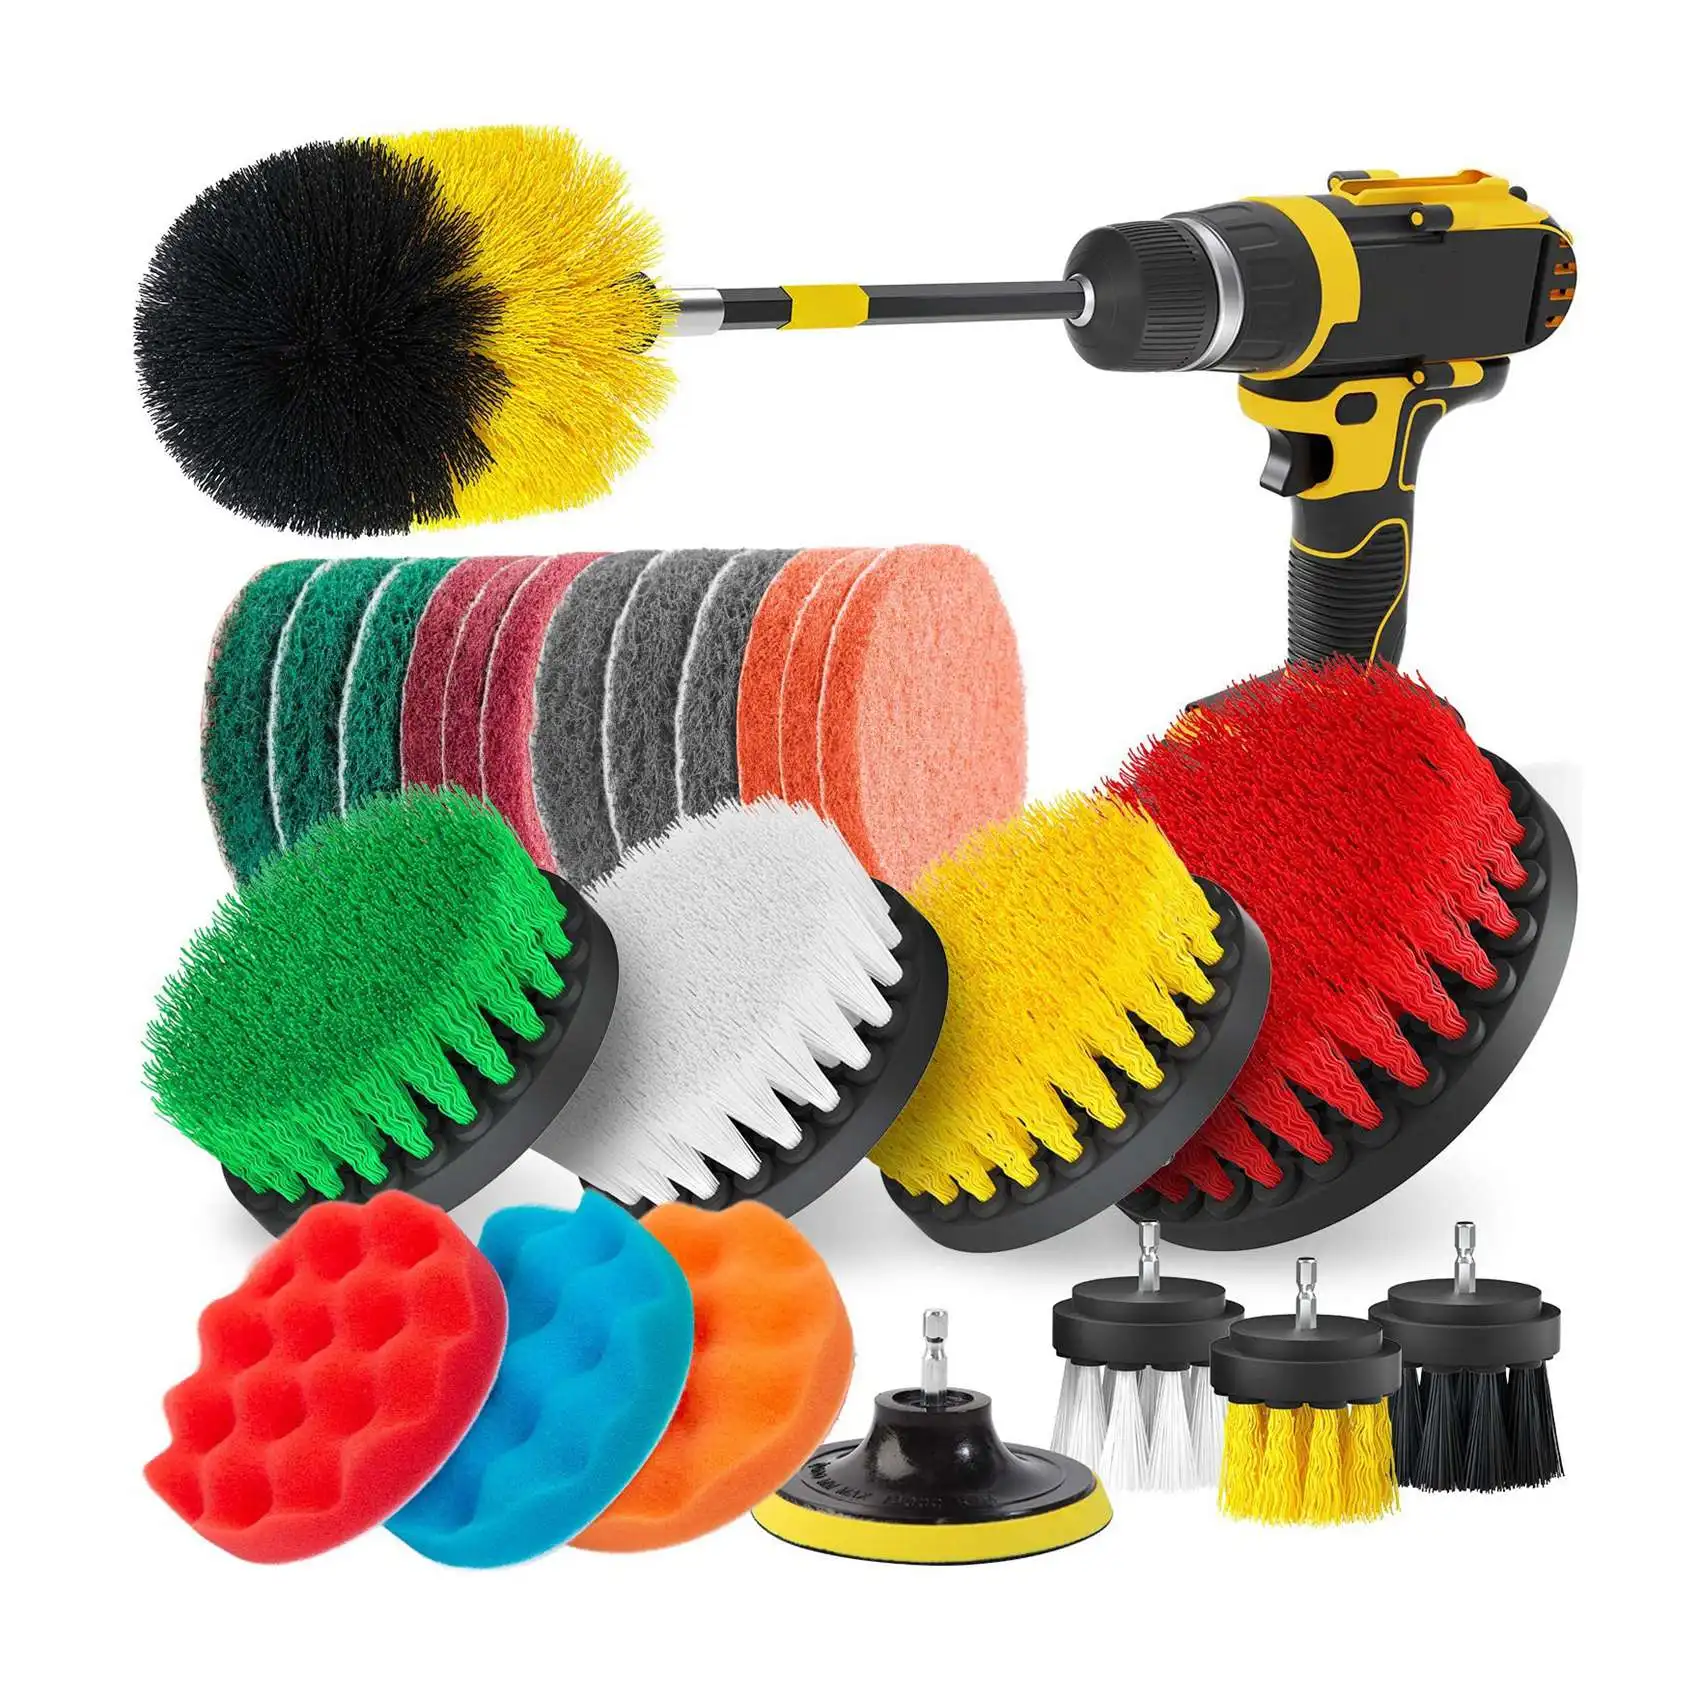 

25 Piece Drill Brush Power Scrubber Cleaning Brush Extended Long Attachment Set All Purpose Drill Scrub Brushes Kit